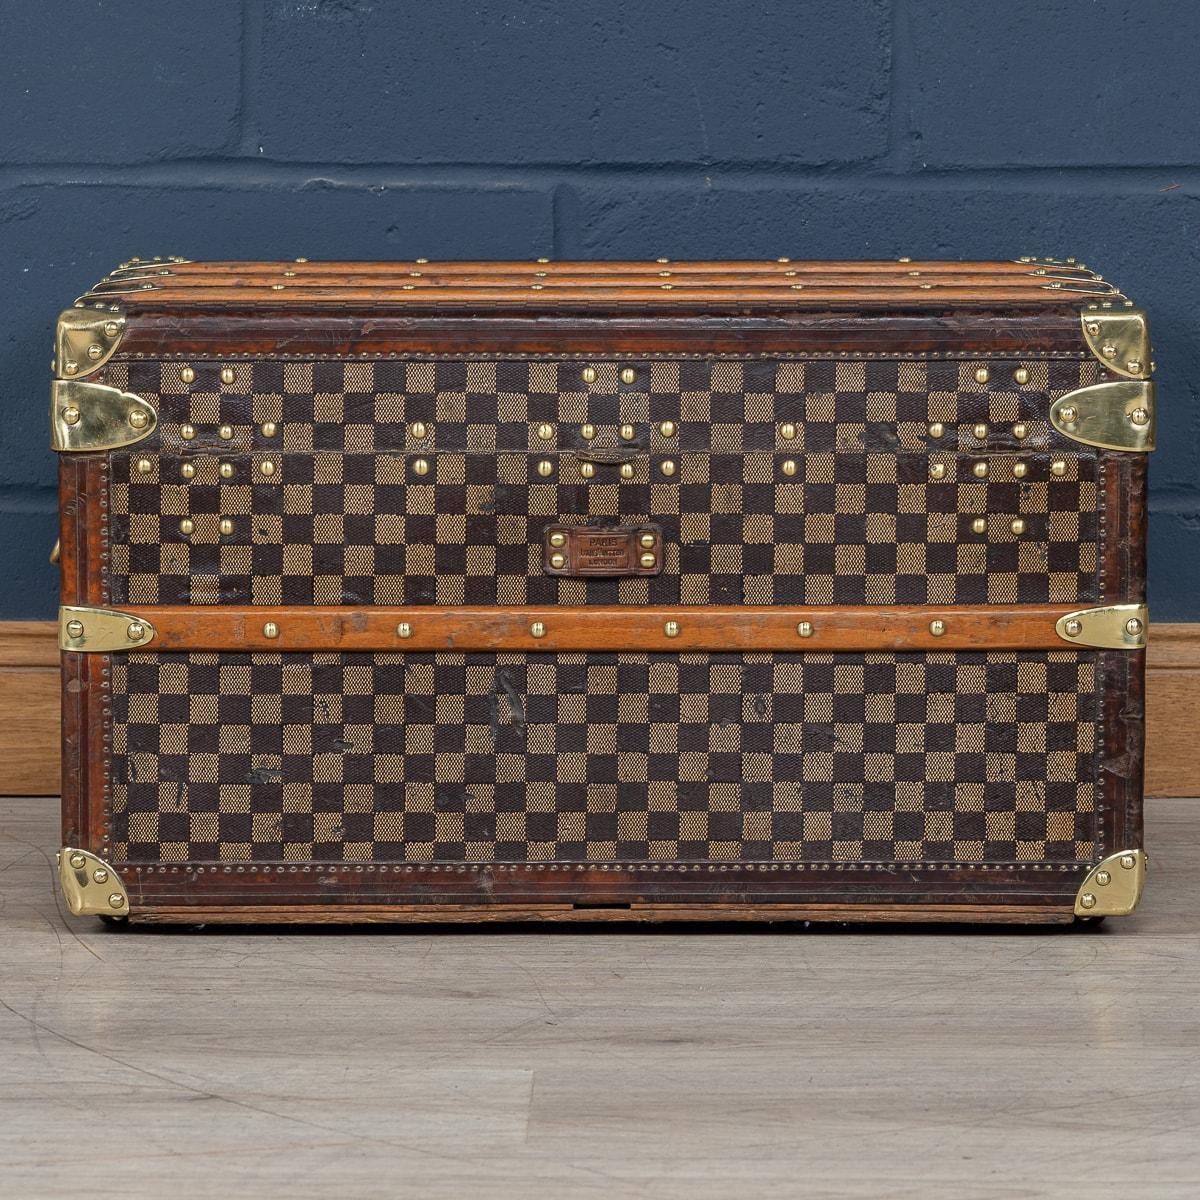 French Rare 19th Century Louis Vuitton Shirt Trunk In Damier Canvas, France c.1895